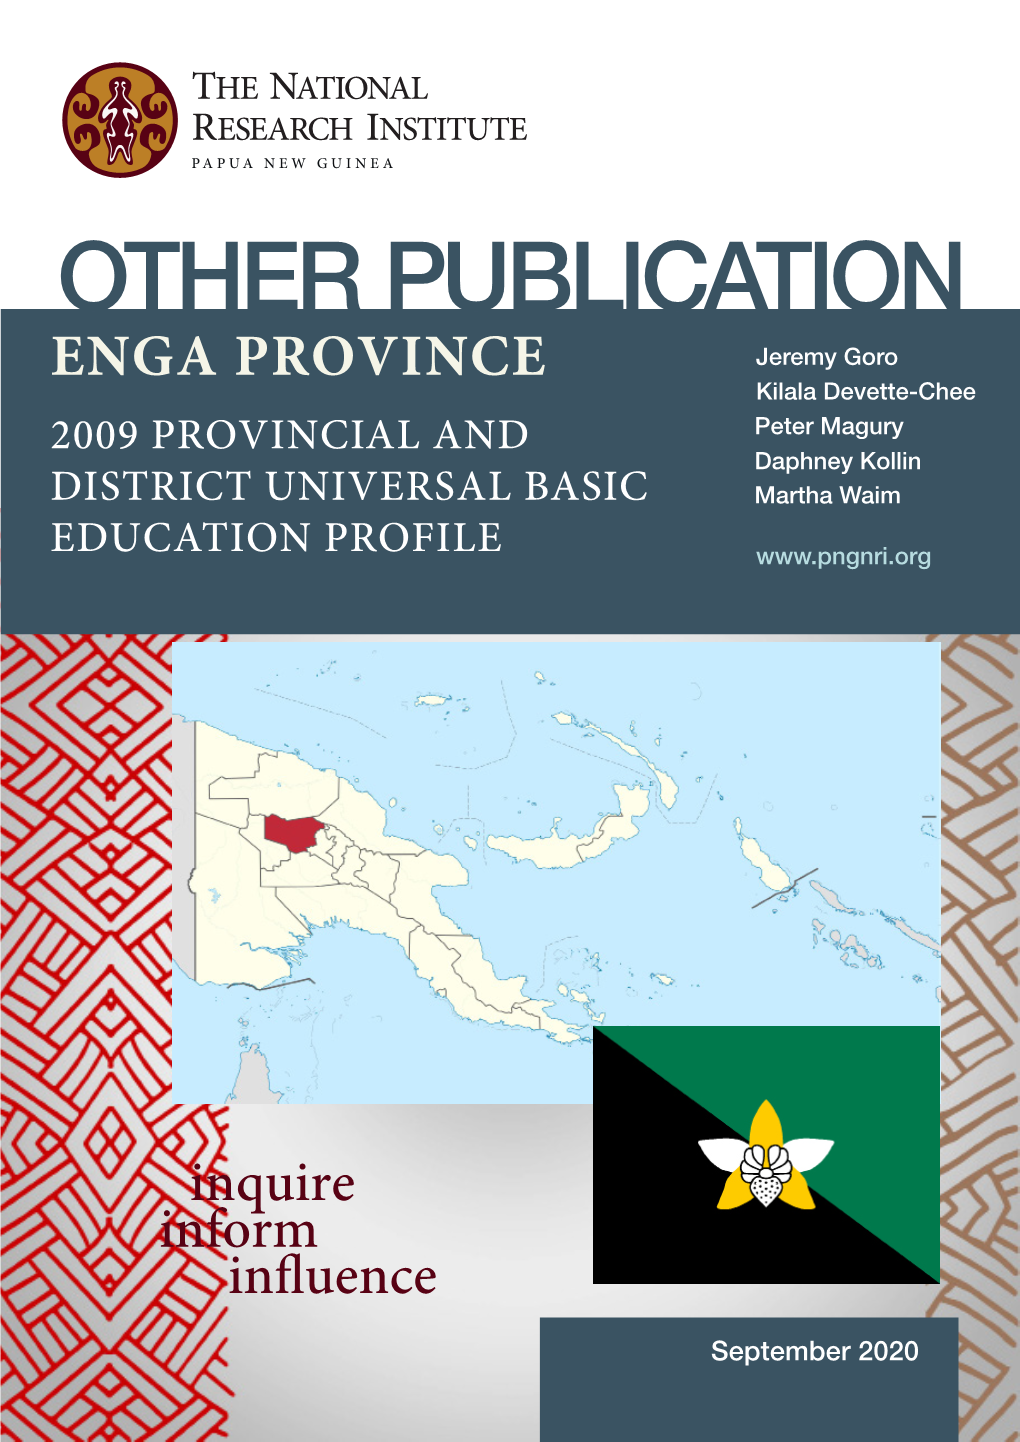 Enga Province: 2009 Provincial and District Universal Basic Education